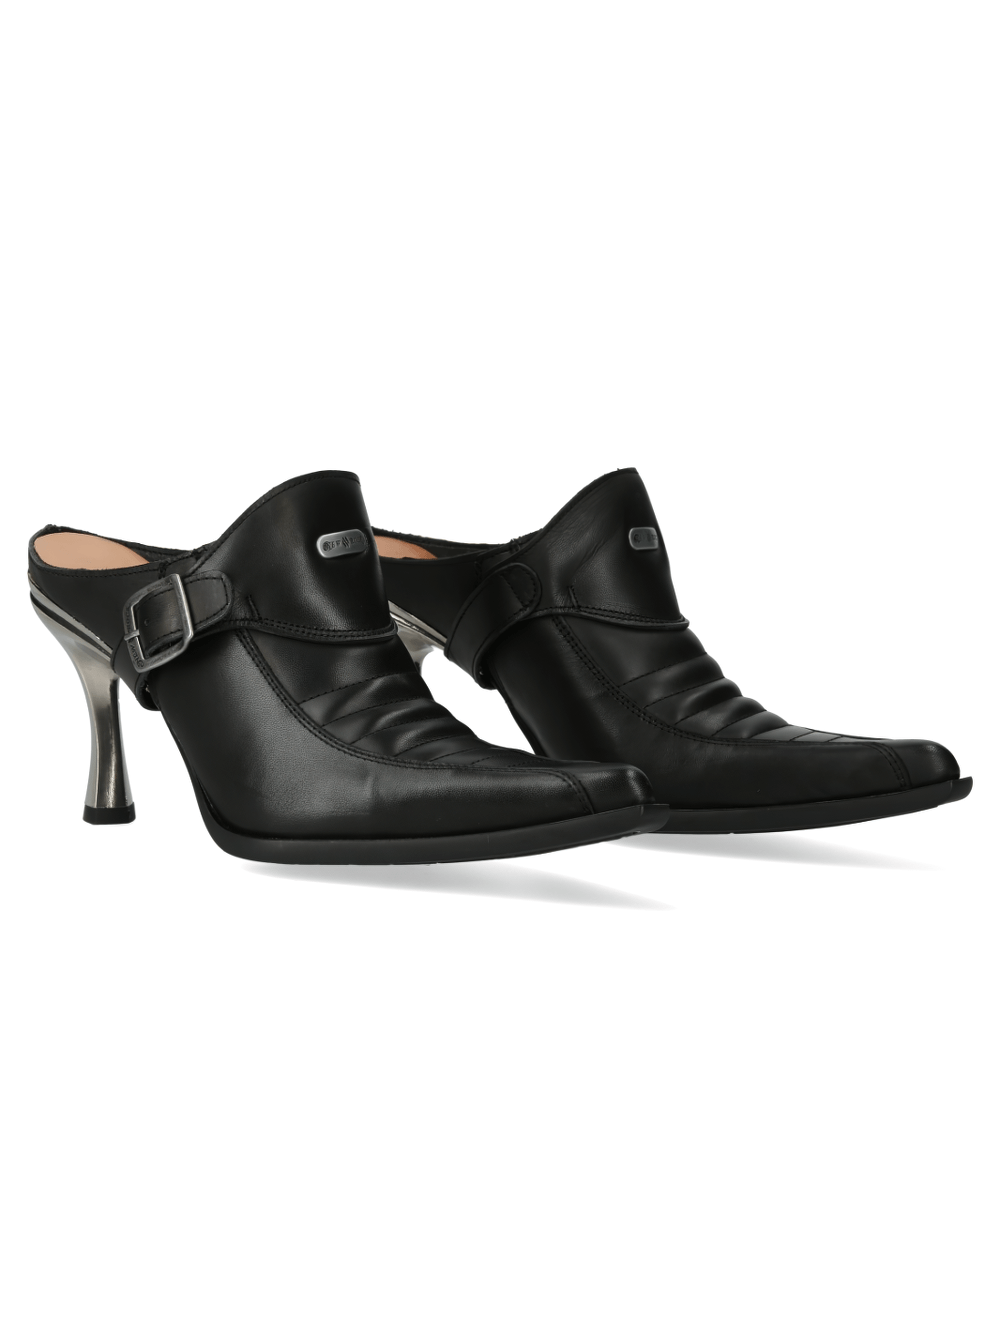 NEW ROCK Elegant Pointed Heel Buckle Shoes in Black Leather